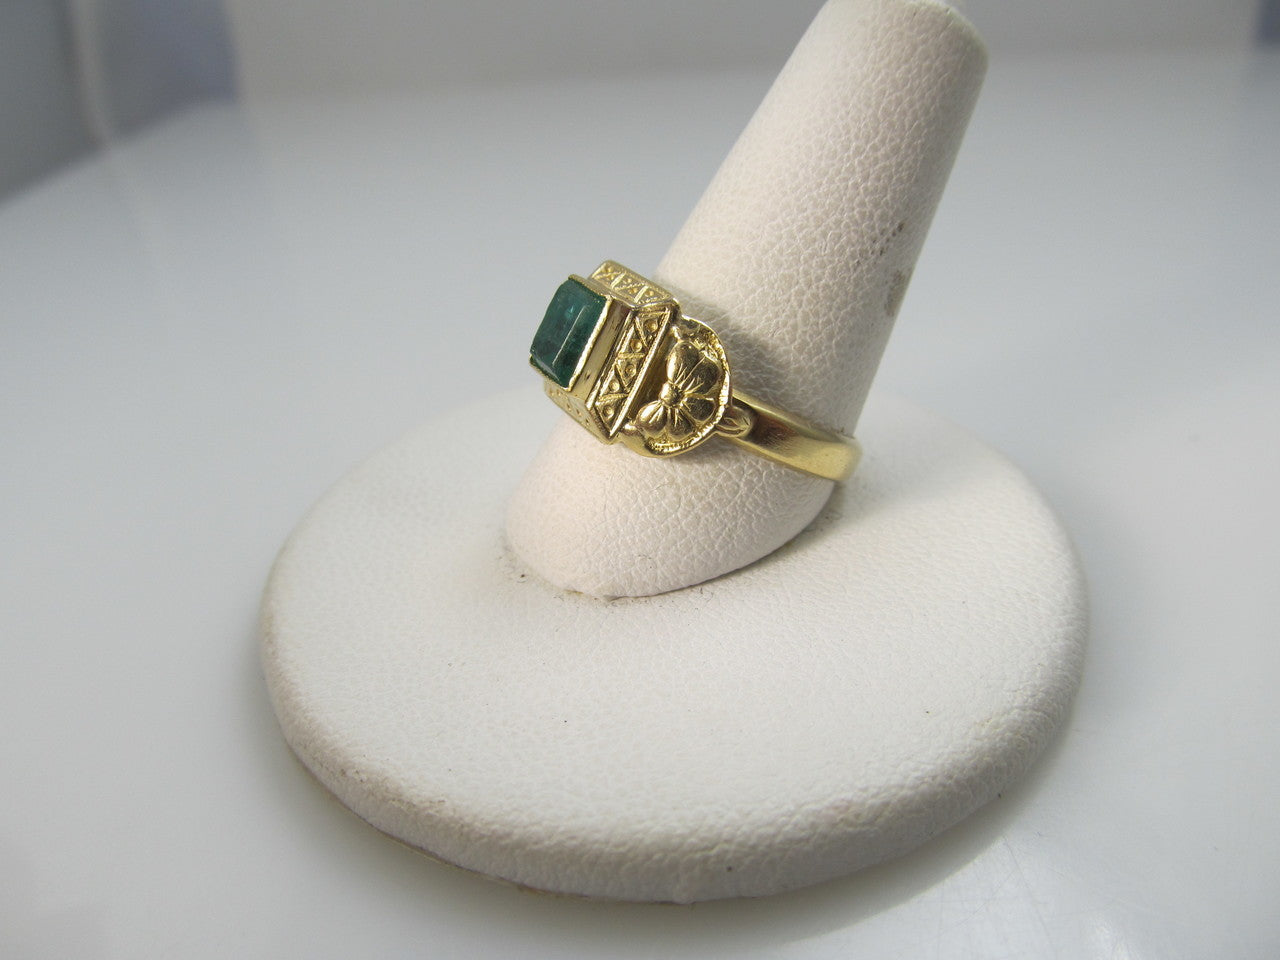 Vintage 18k Yellow Gold Ring With A .60ct Emerald, Circa 1930